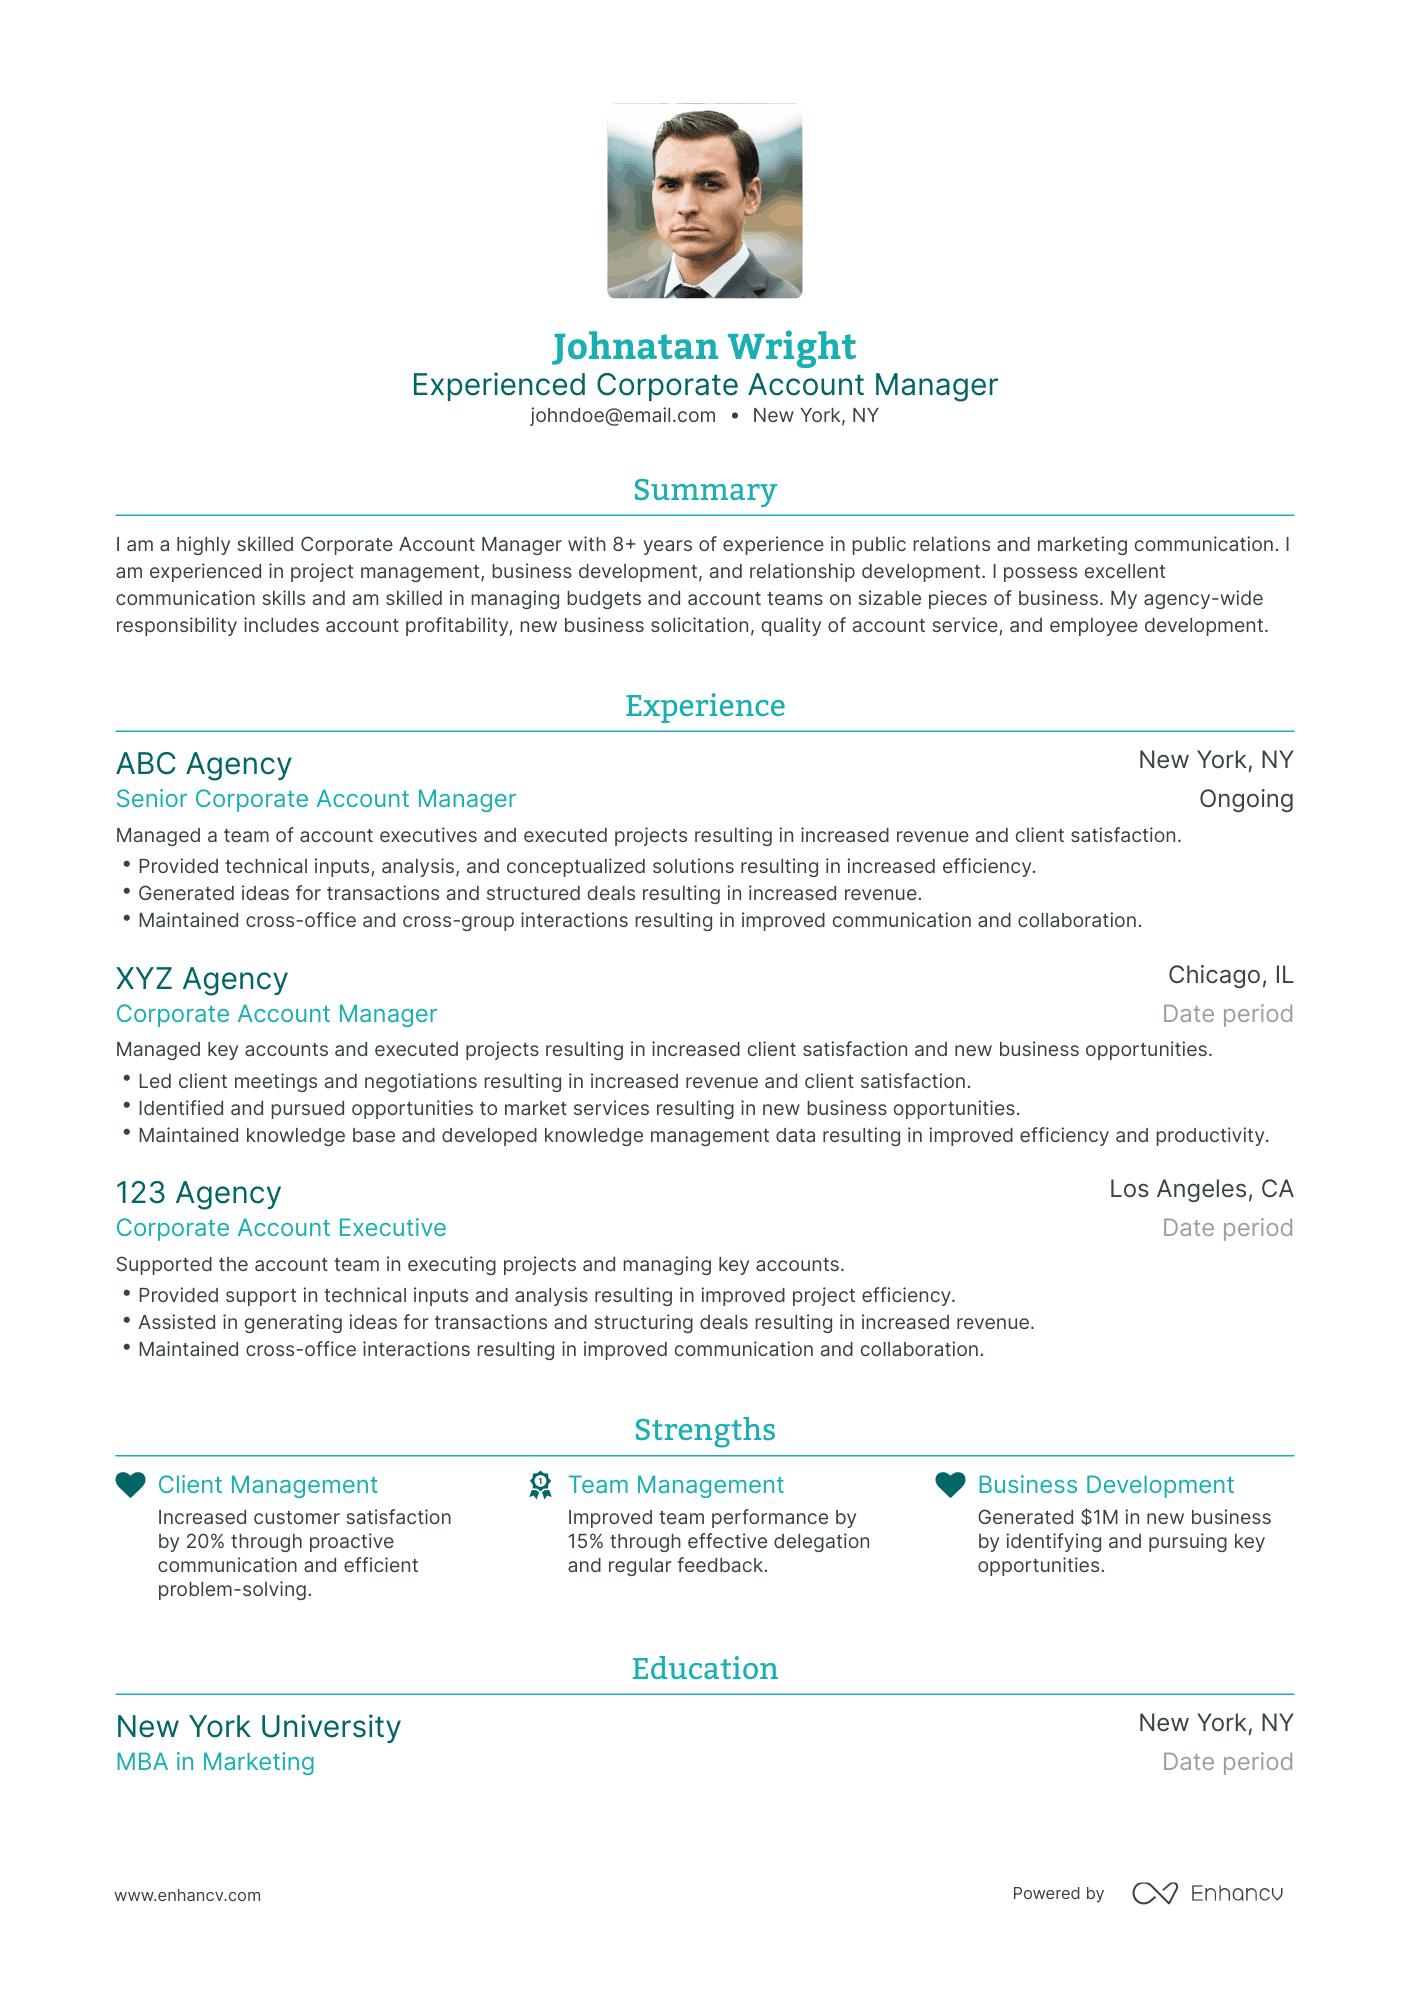 Traditional Corporate Account Manager Resume Template